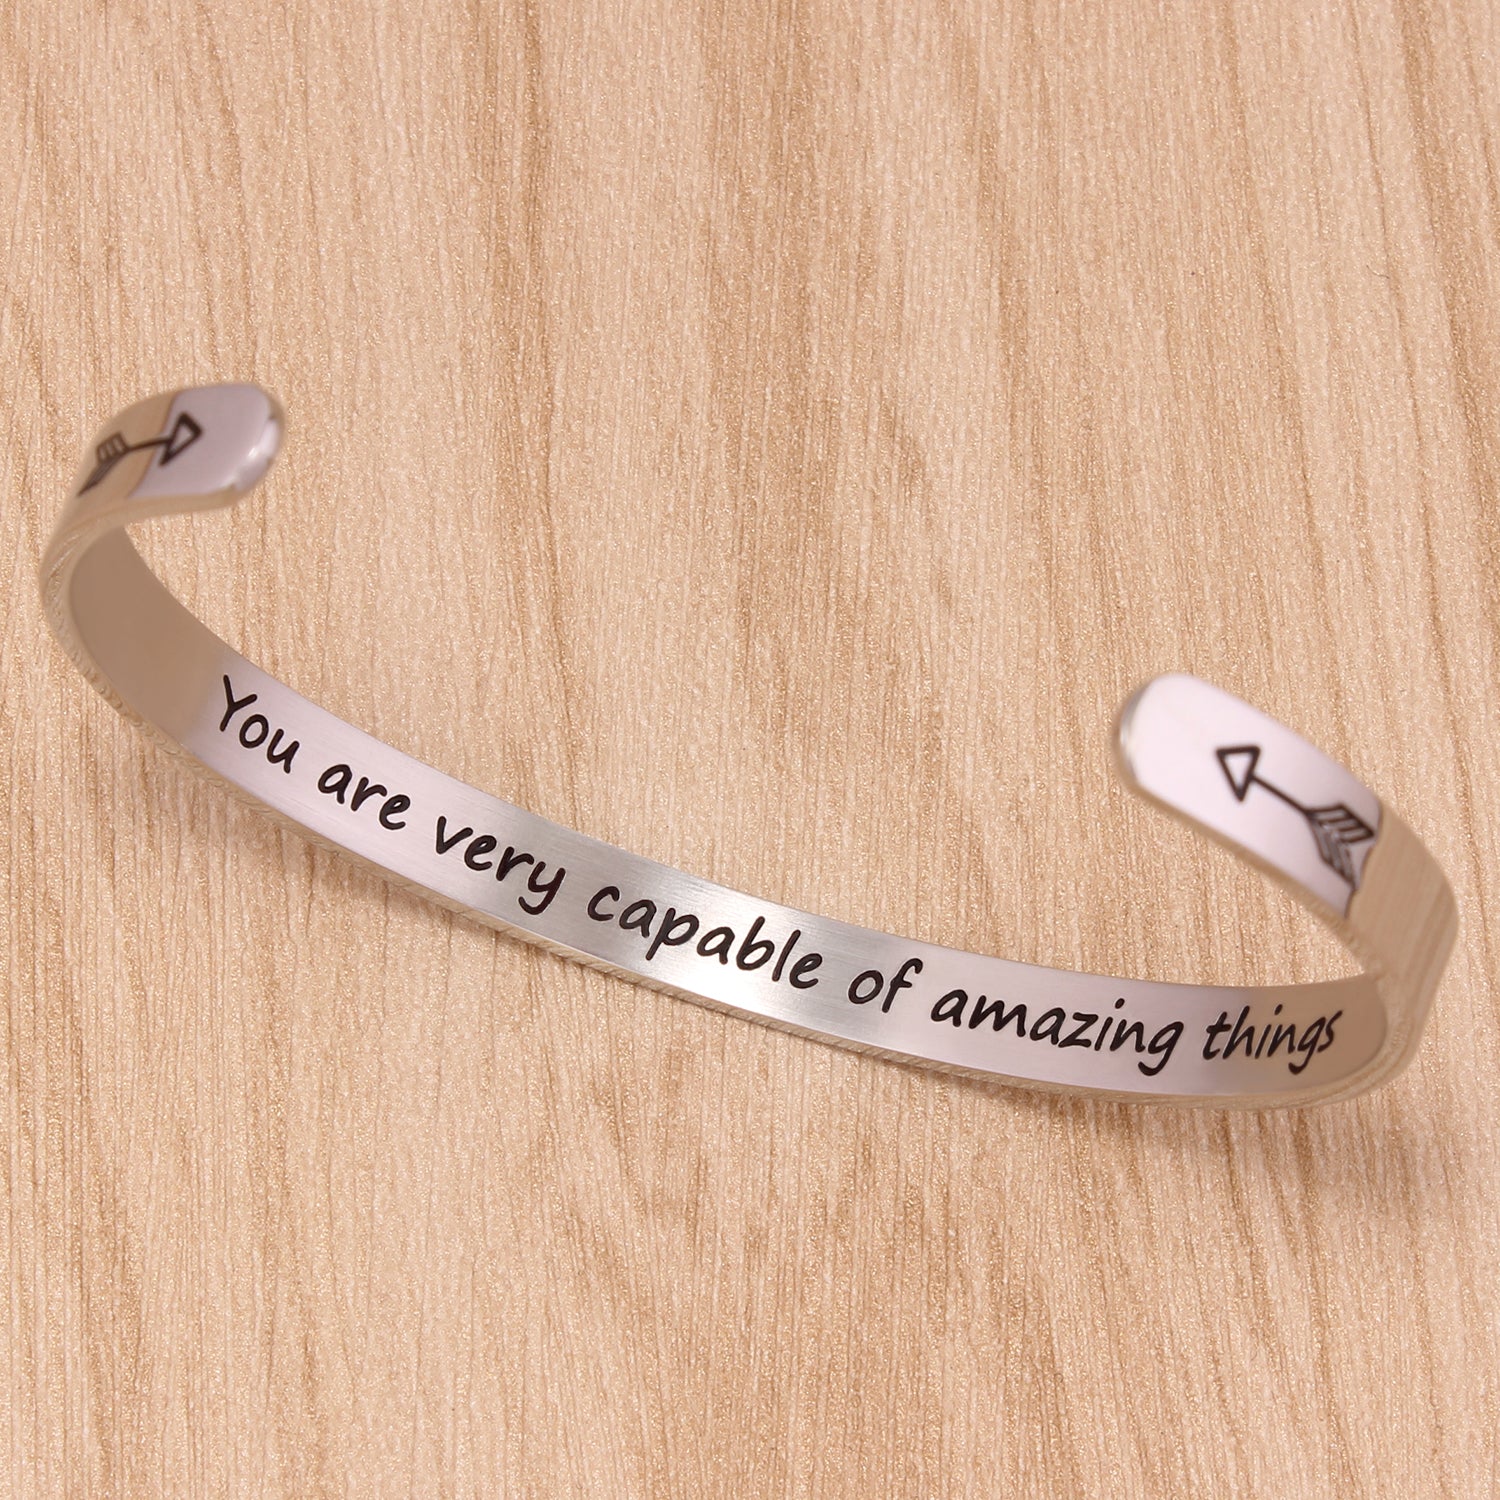 You are very capable of amazing things